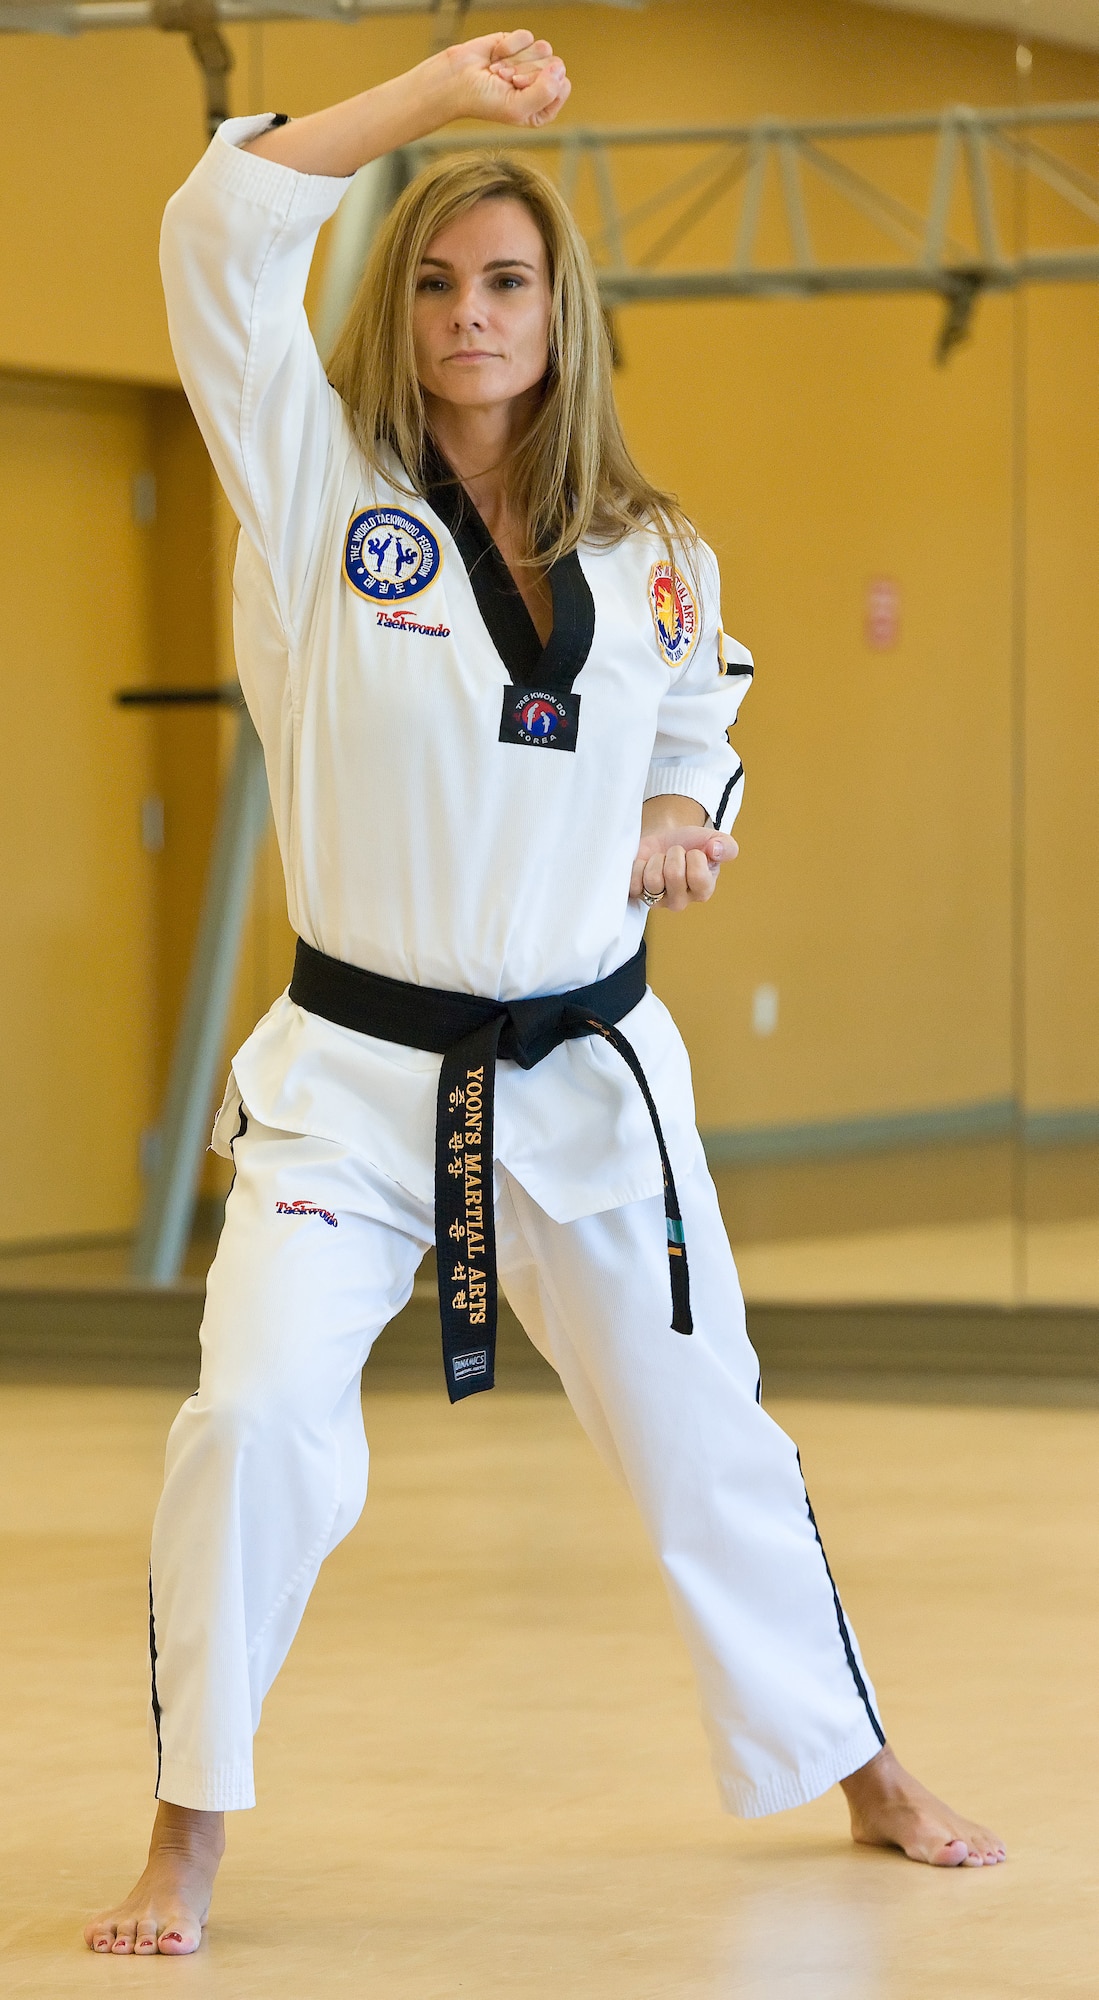 Dawn Fiore, the wife a Reserve pilot assigned to the 326th Airlift Squadron, Dover Air Base, Del., demonstrates a high block while practicing forms Nov. 16, 2012, at the base fitness center. Fiore was diagnosed with multiple sclerosis in 2005 but has since earned a first degree black belt in Taekwondo. (U.S. Air Force photo/Roland Balik)